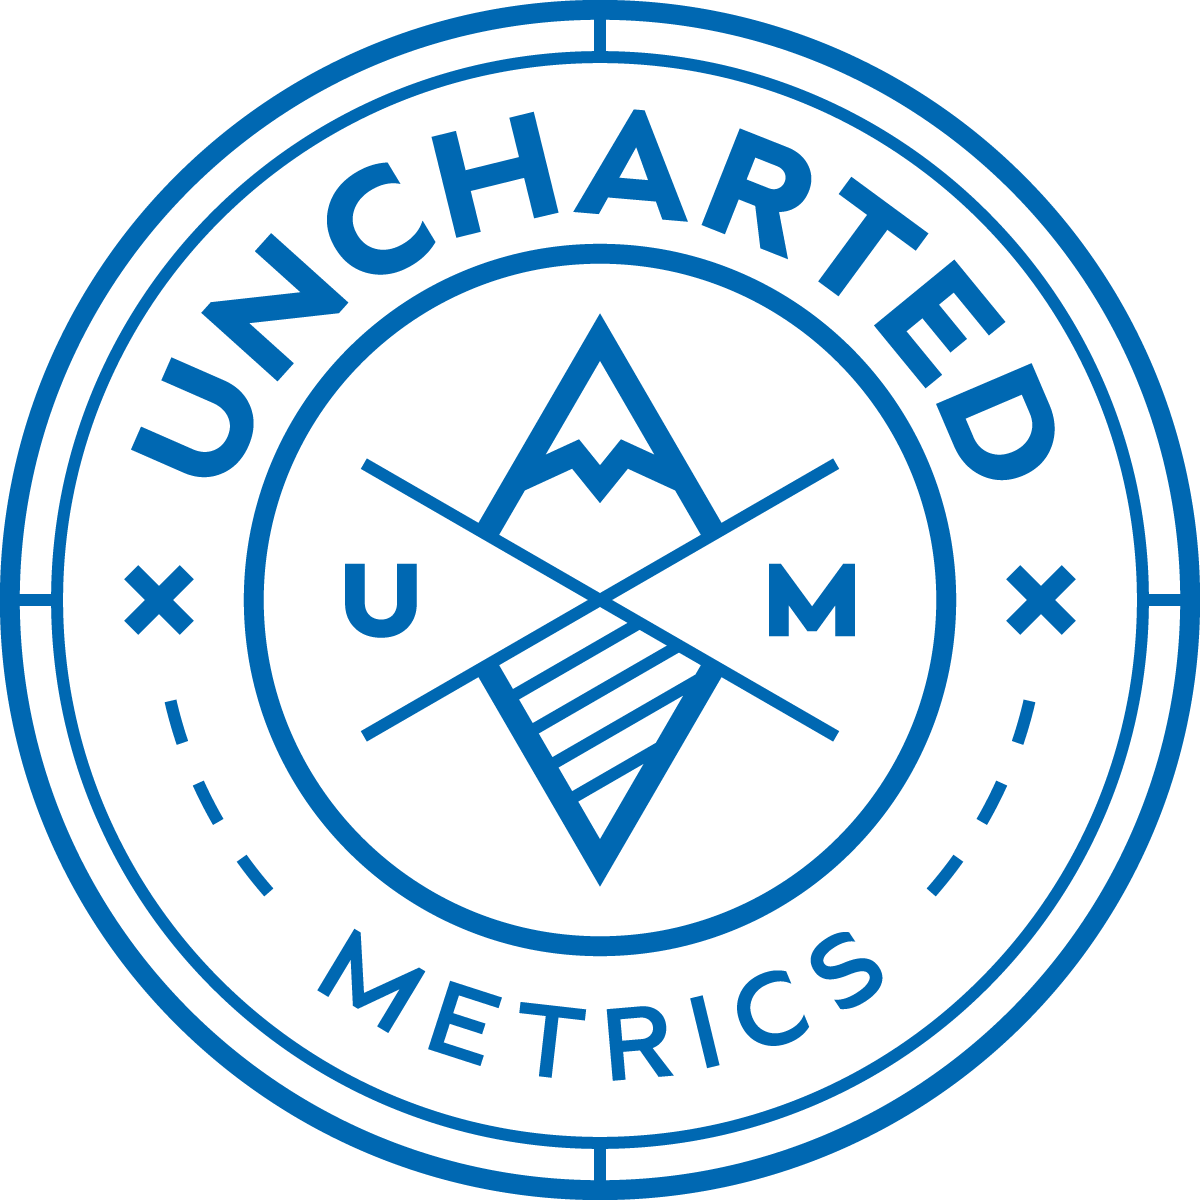 Uncover the extraordinary with Uncharted Metrics, your compass for smarter growth in the dynamic realm of marketing analytics. Transforming data into an insight engine, we guide hungry leaders toward calculated decisions powered by data. Our tailored services accelerate revenue, reduce costs, and eliminate uncertainty. Ready to chart the uncharted territories of your data exploration? logo